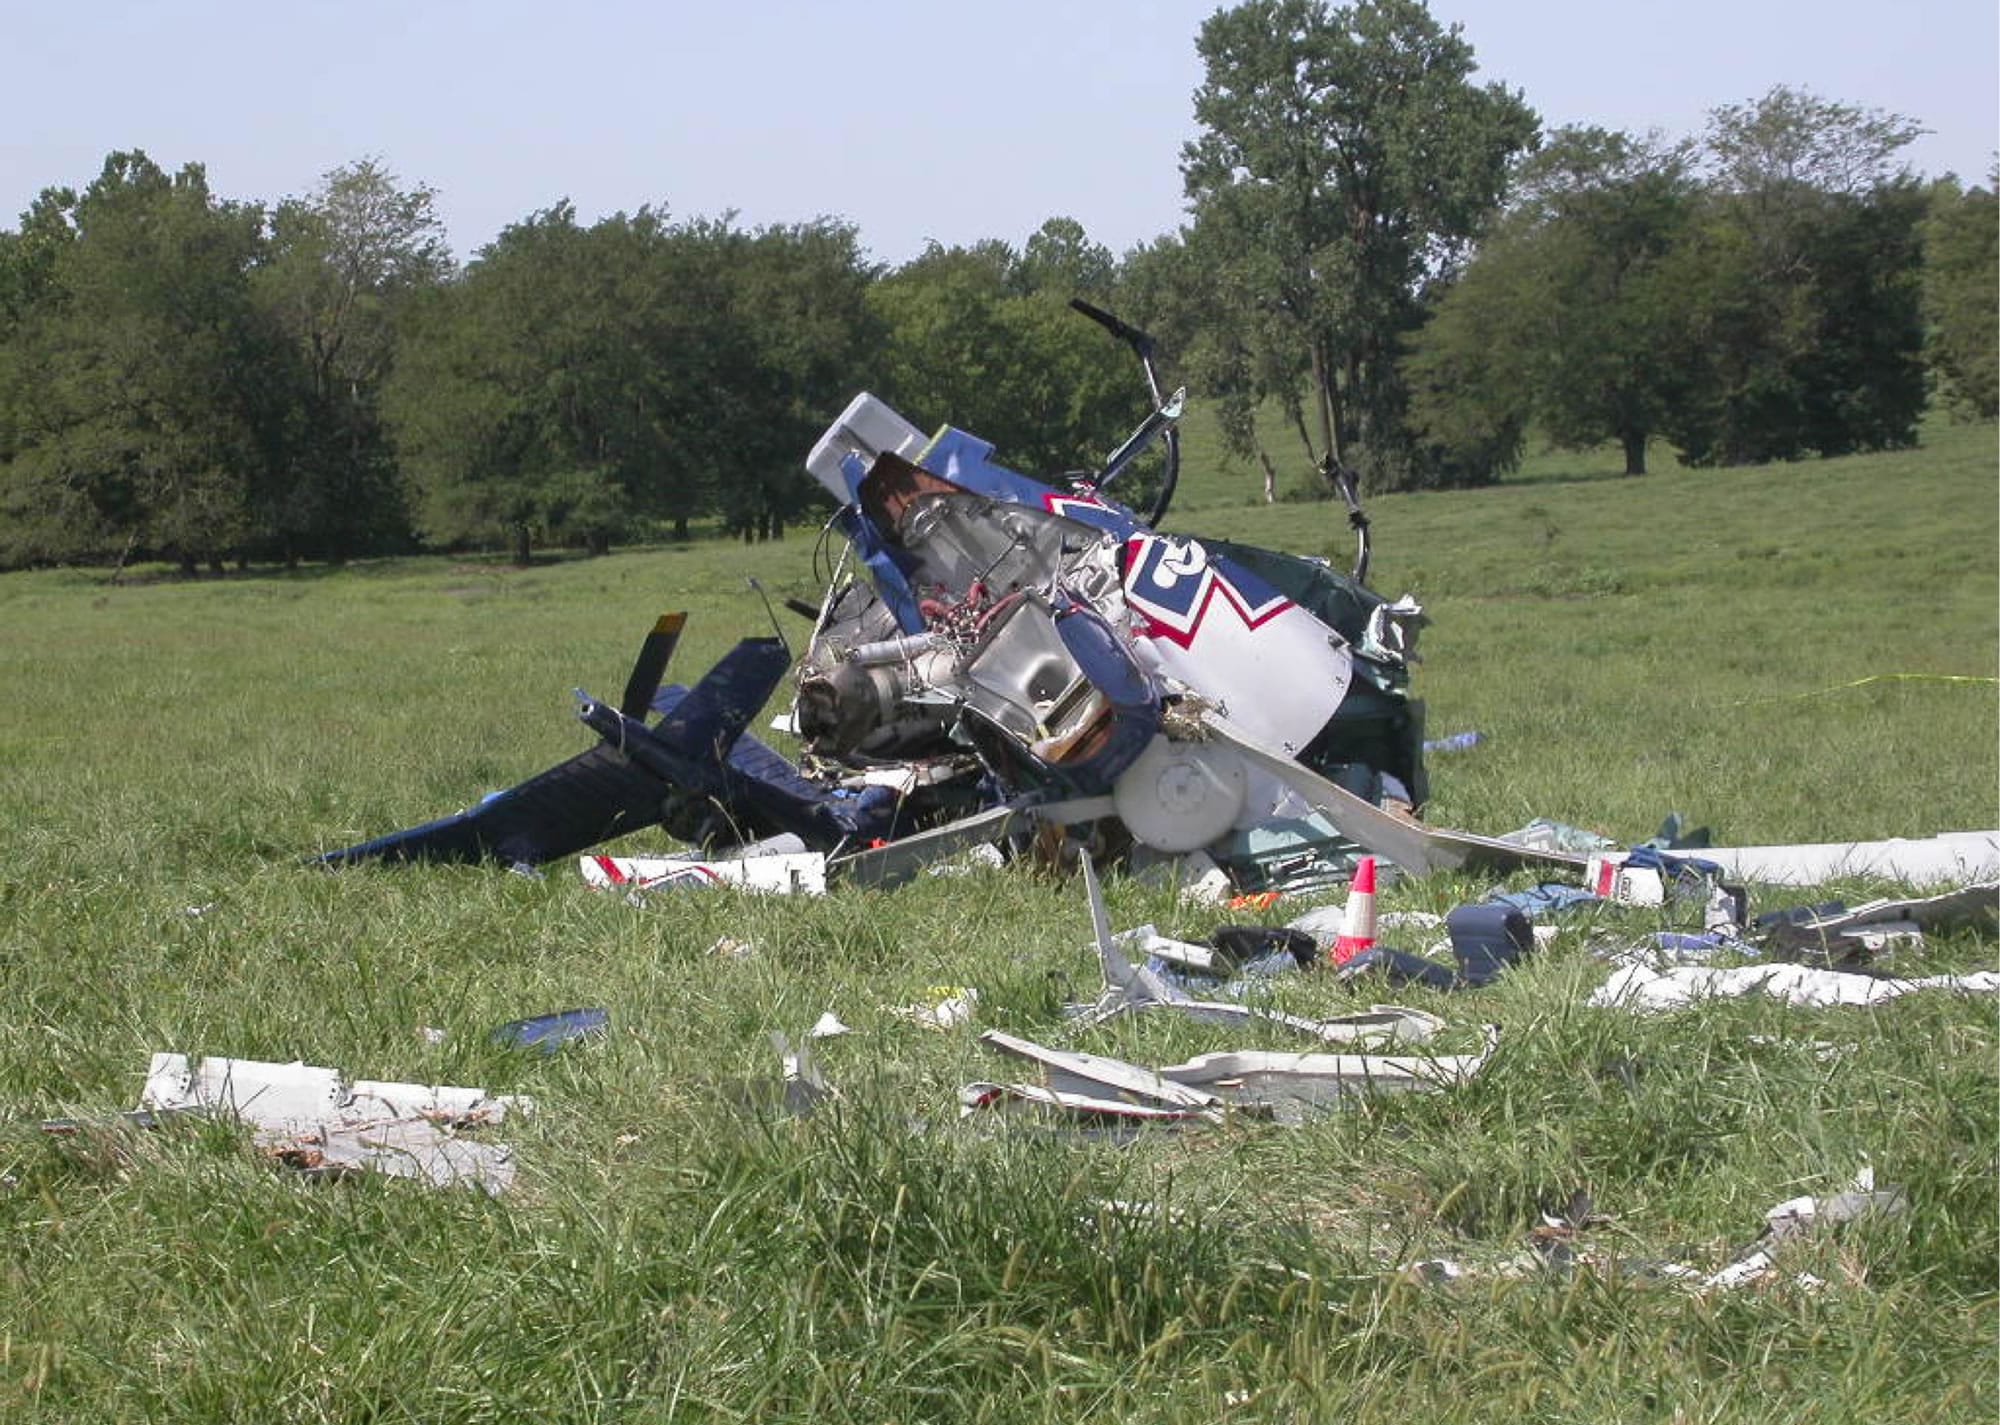 The wreckage of a helicopter that crashed near Mosby, Mo., on Aug. 26, 2011.